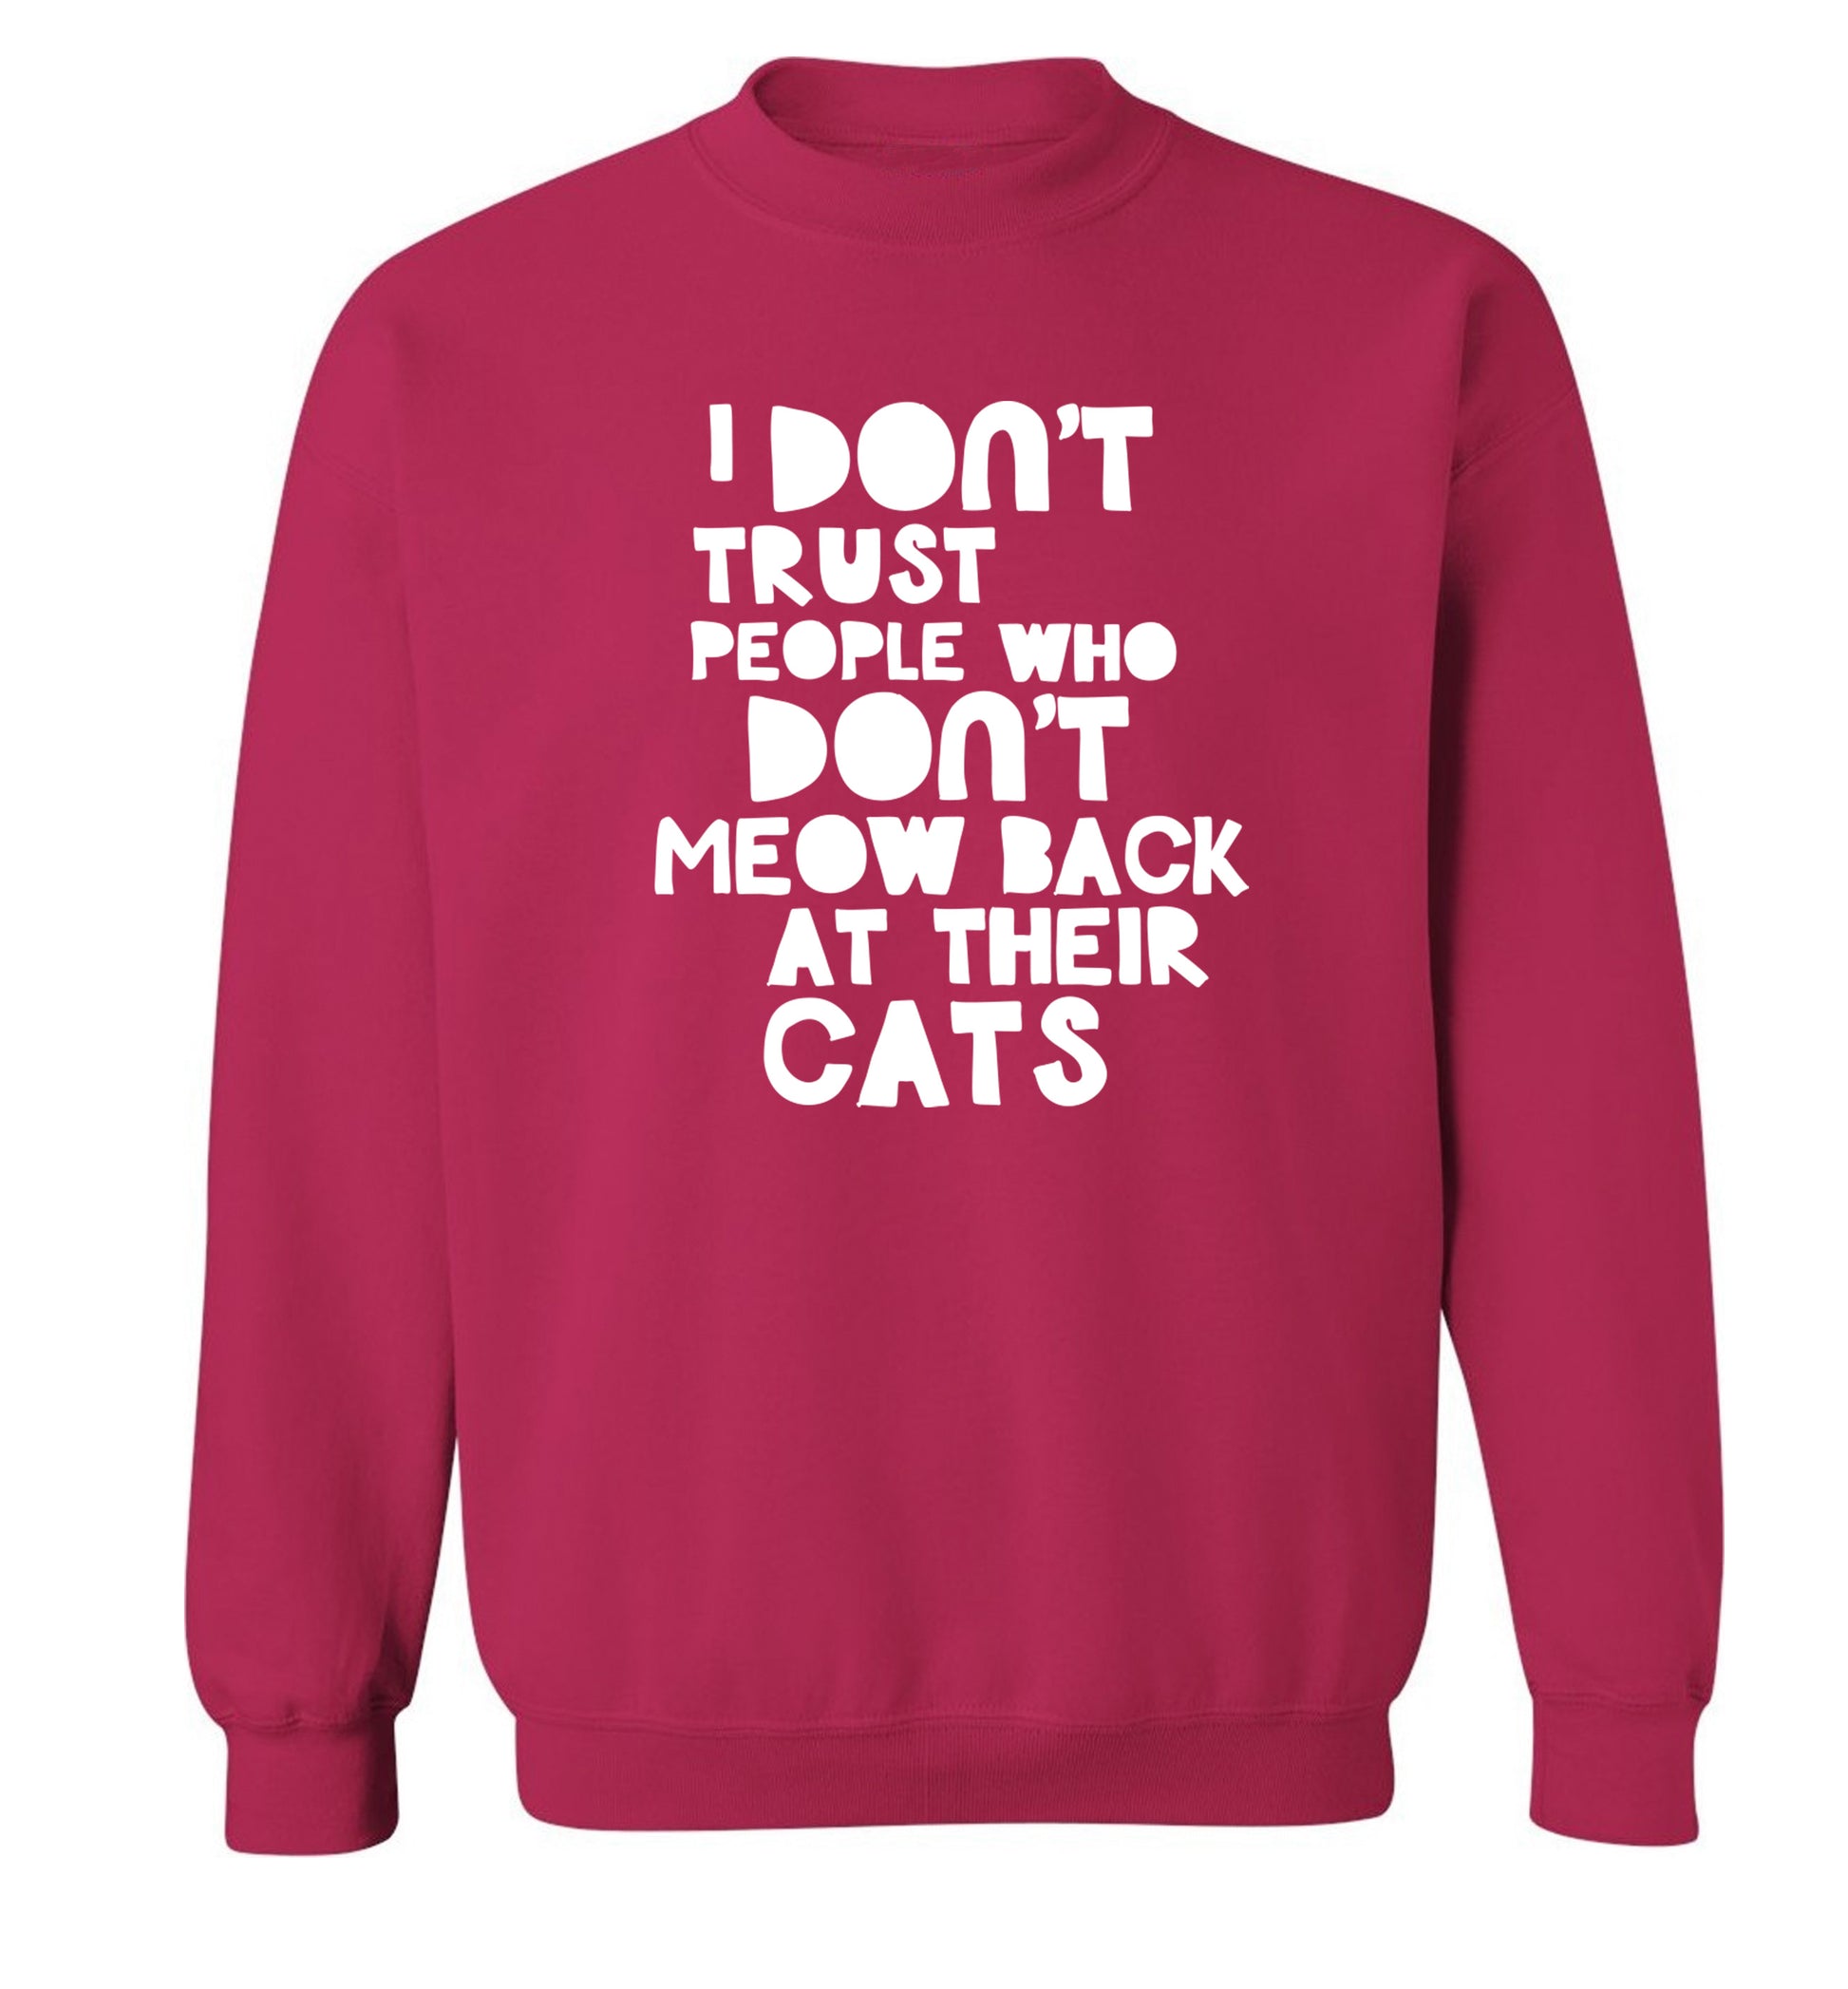 I don't trust people who don't meow back at their cats Adult's unisex pink Sweater 2XL